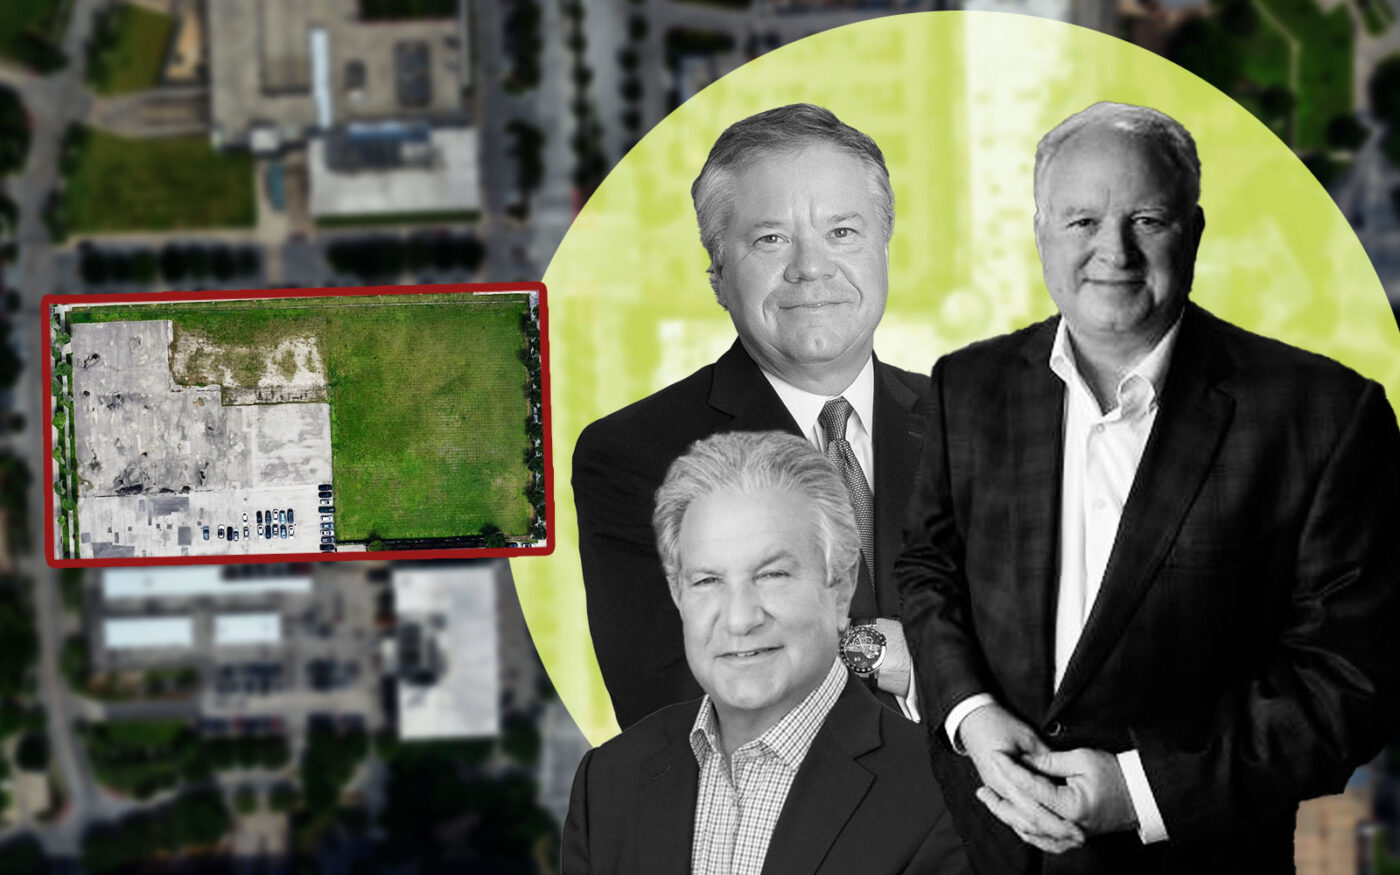 Crescent Venture Snags Coveted Site in Uptown Houston